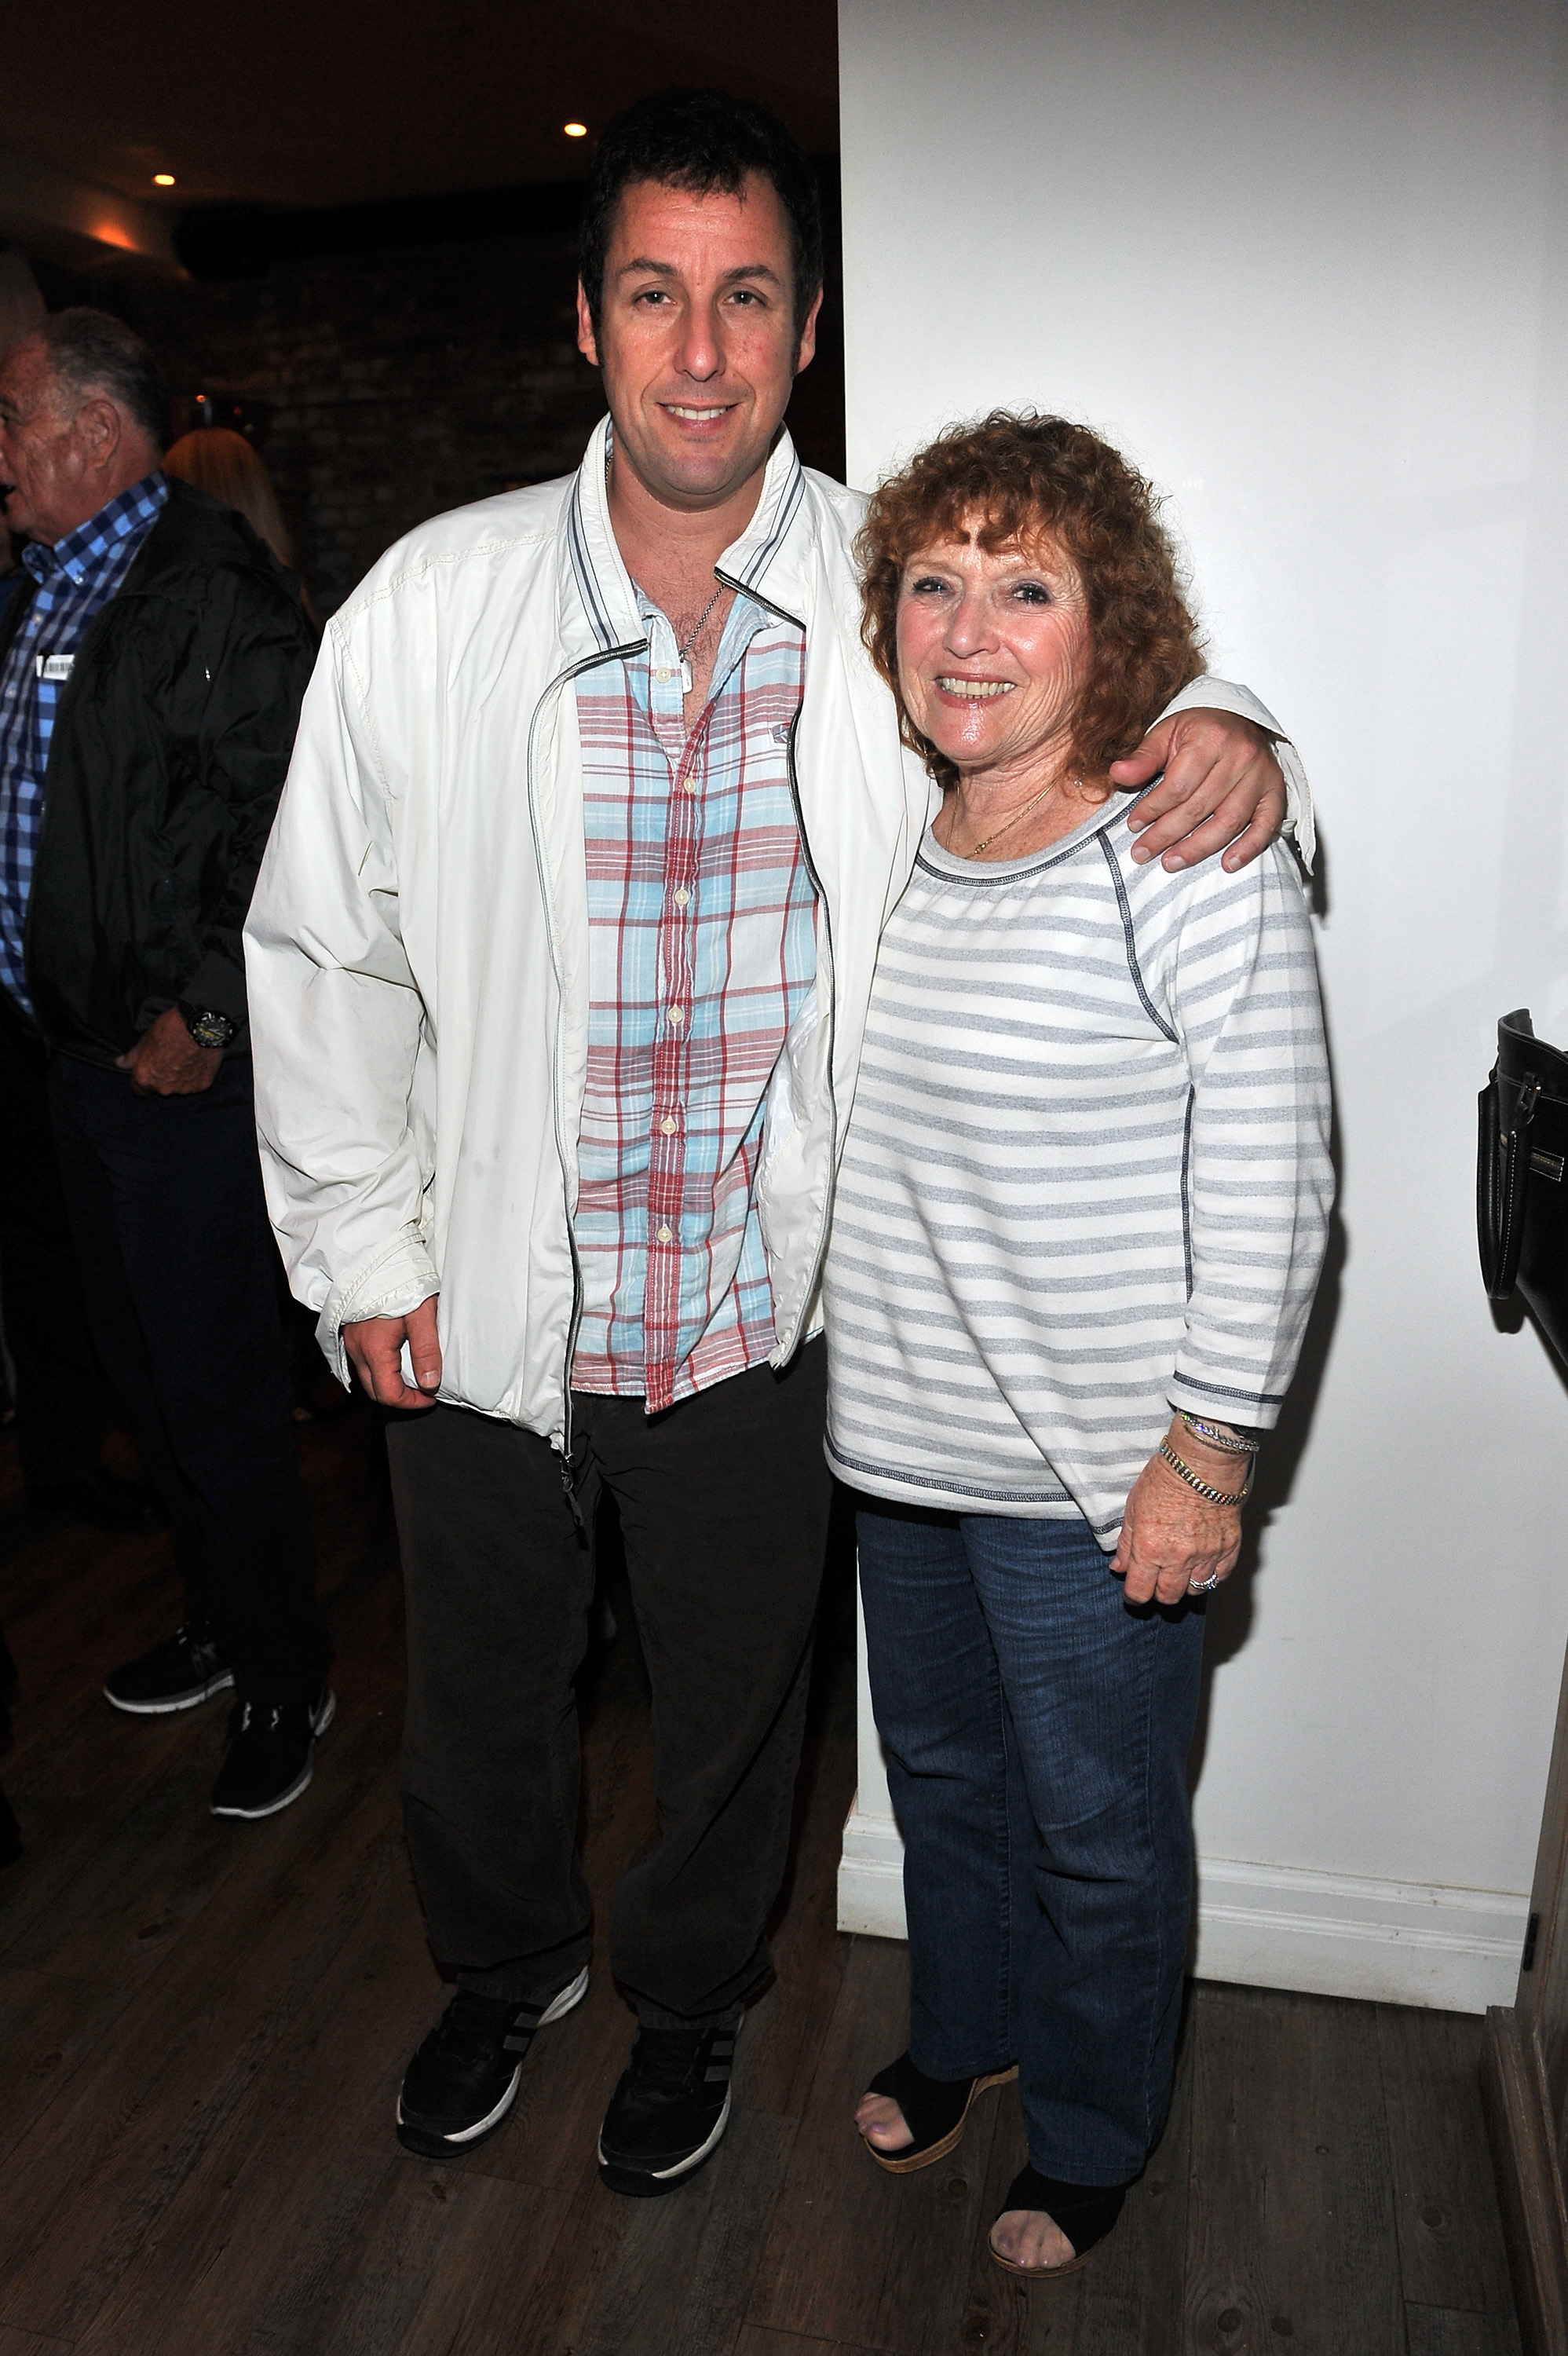 Adam Sandler and mother, Judy Sandler in Toronto, Canada on September 10, 2014 | Source: Getty images